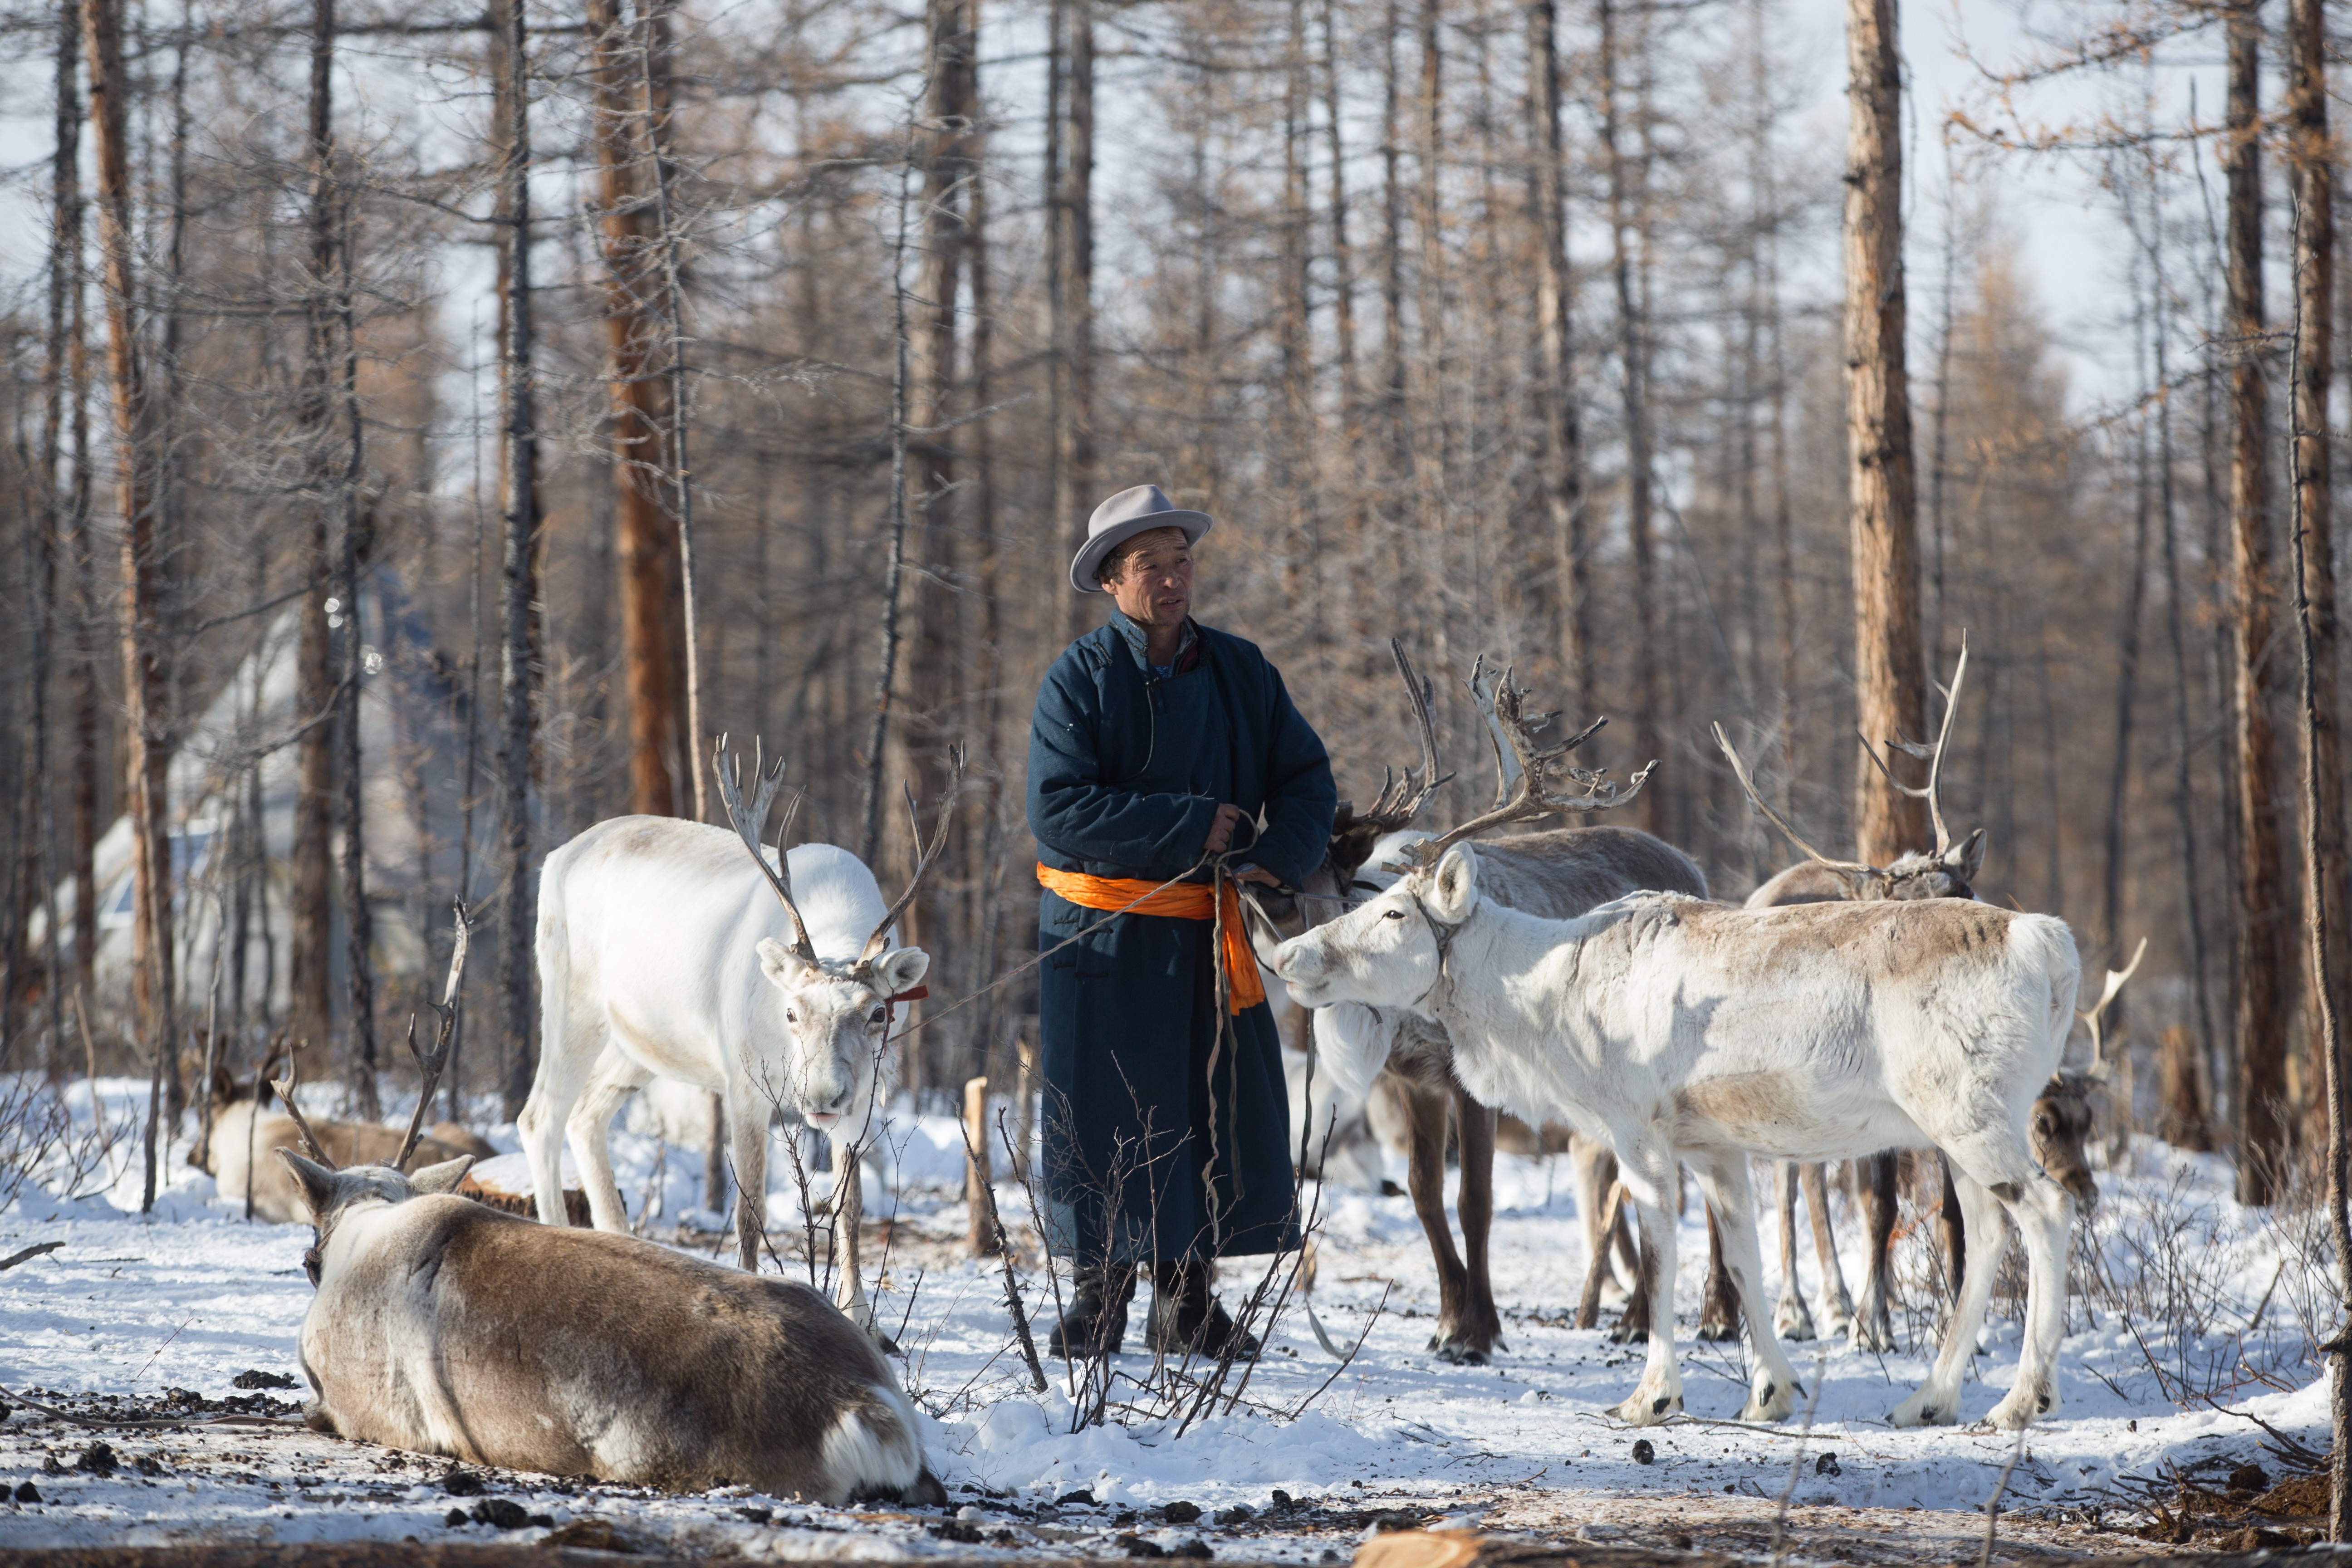 A Dukha herder tends to his reindeers in winter in the taiga of northern Mongolia. Photo: Byamba Ochir